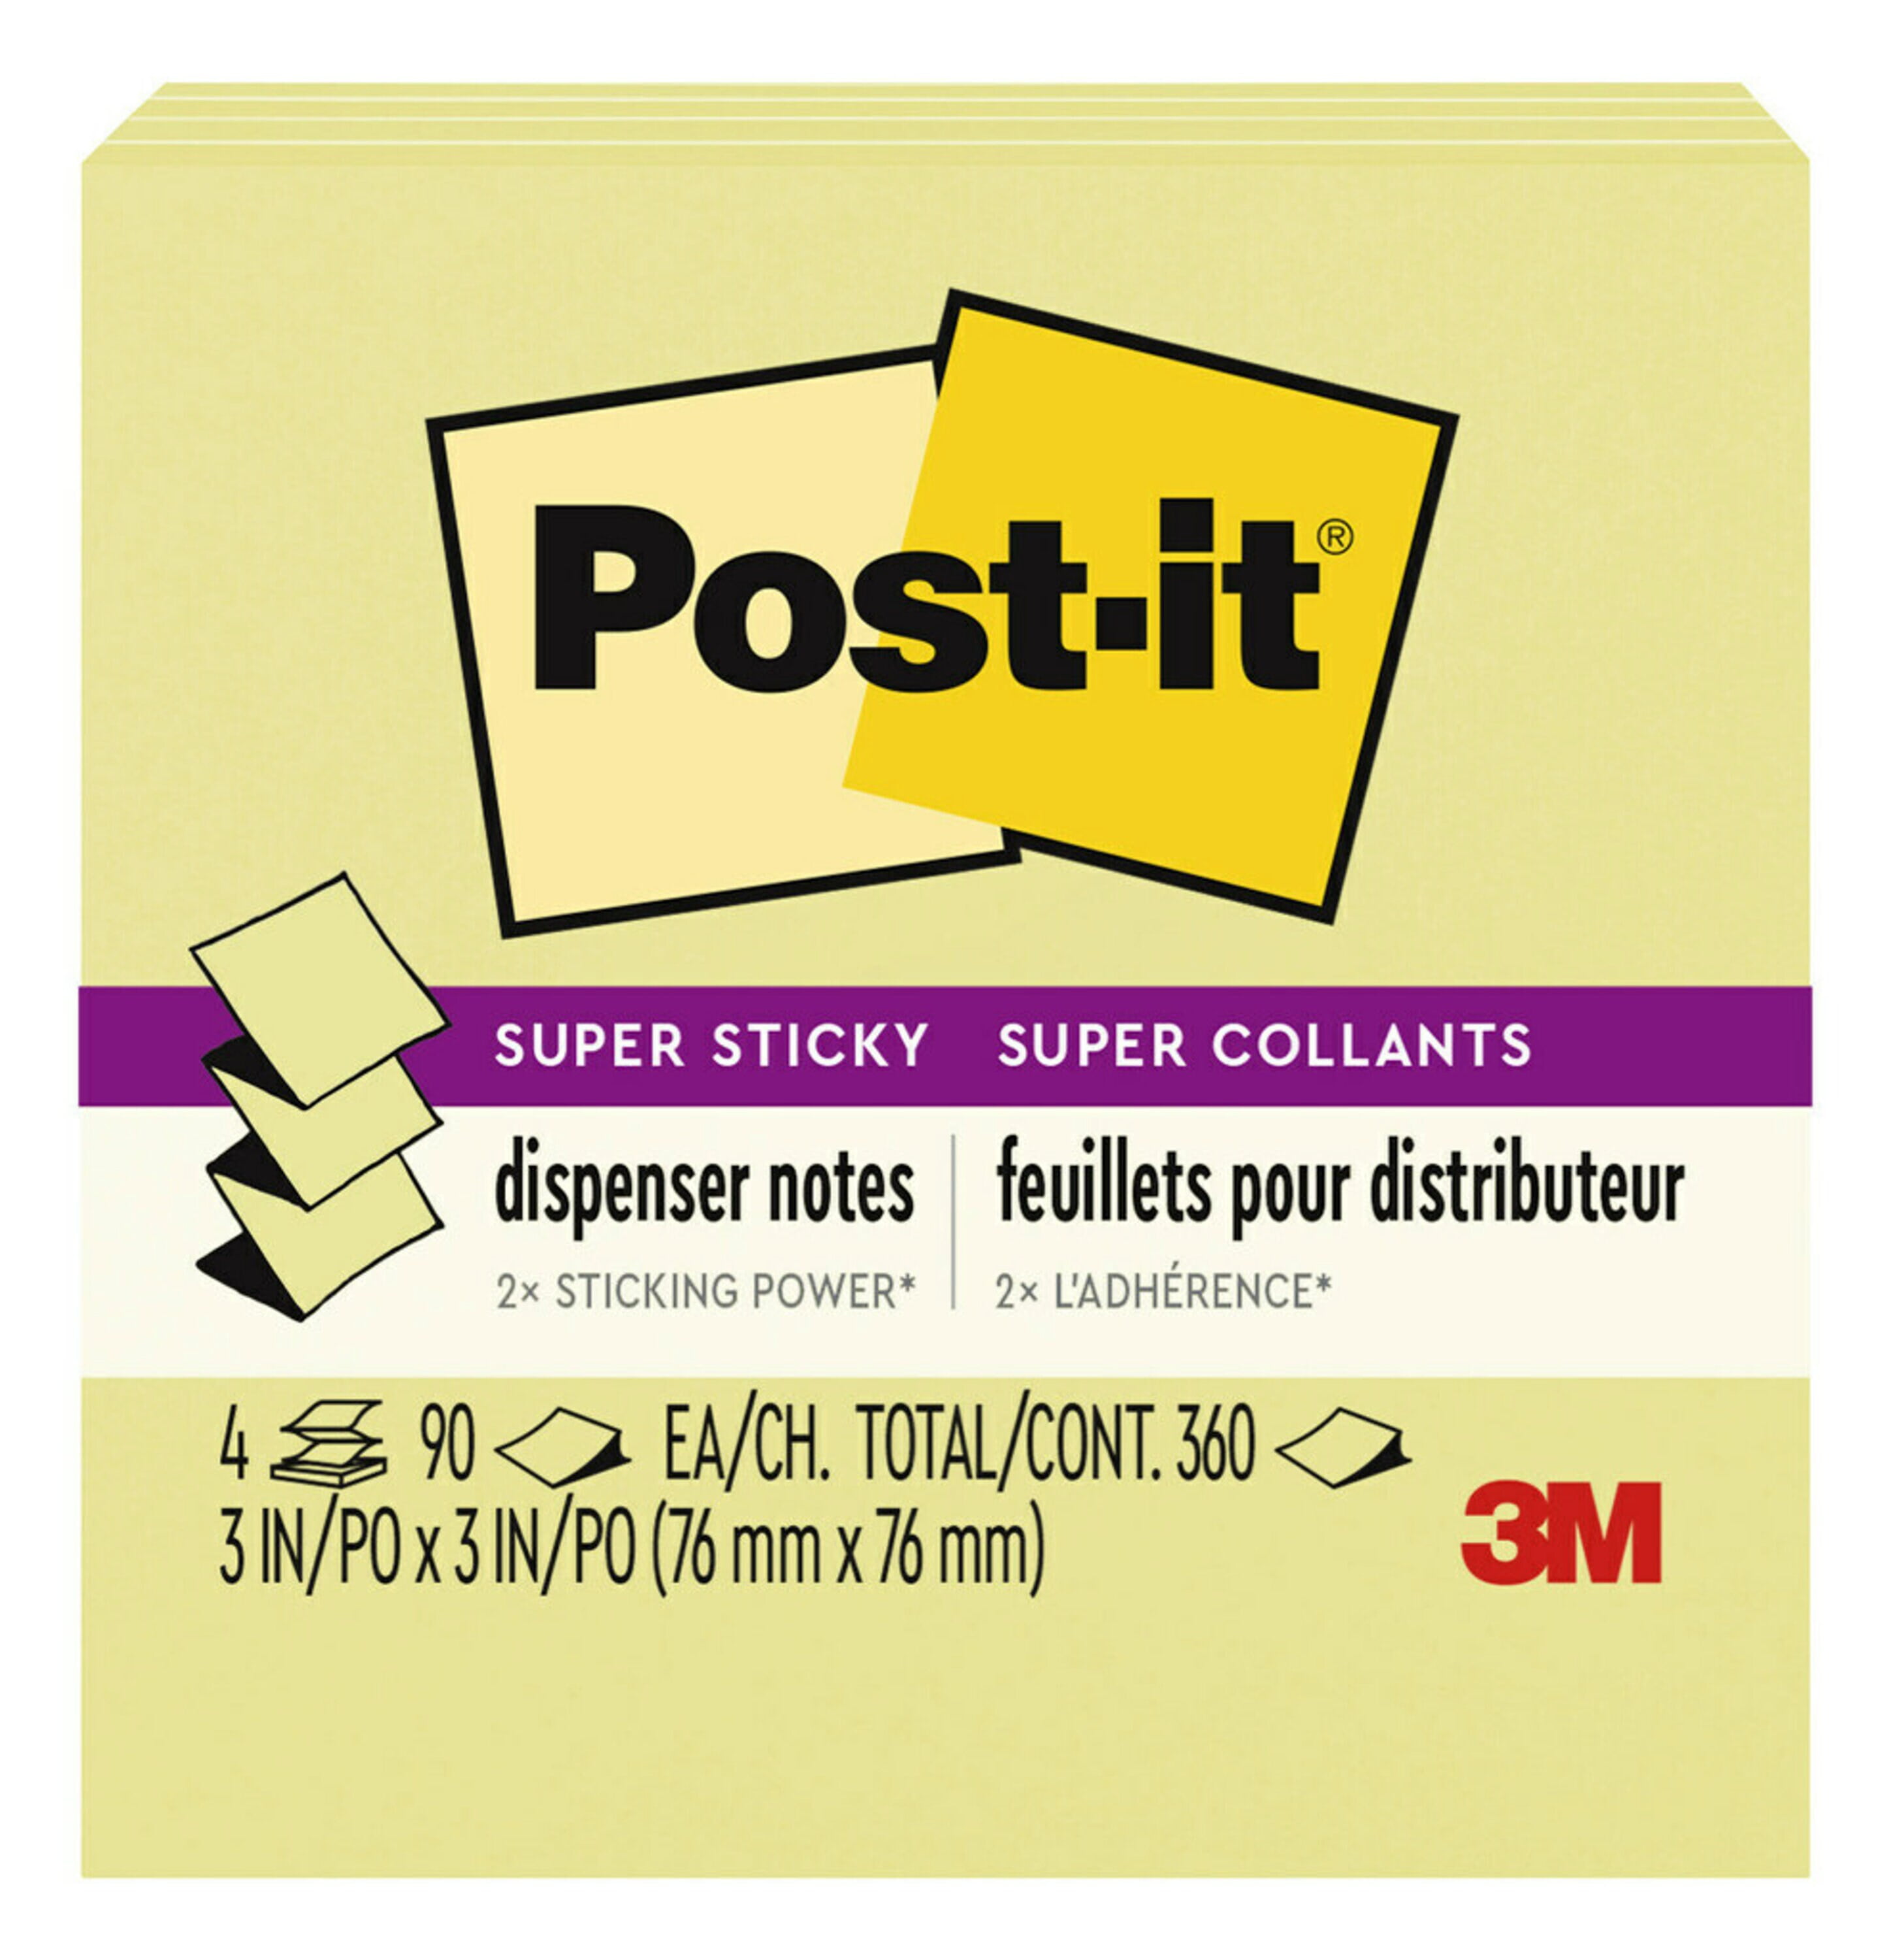 Post-it Extreme Notes 3 in X 12 Pads 45 Sheets per Pad Green Yellow Orange MINT for sale online 